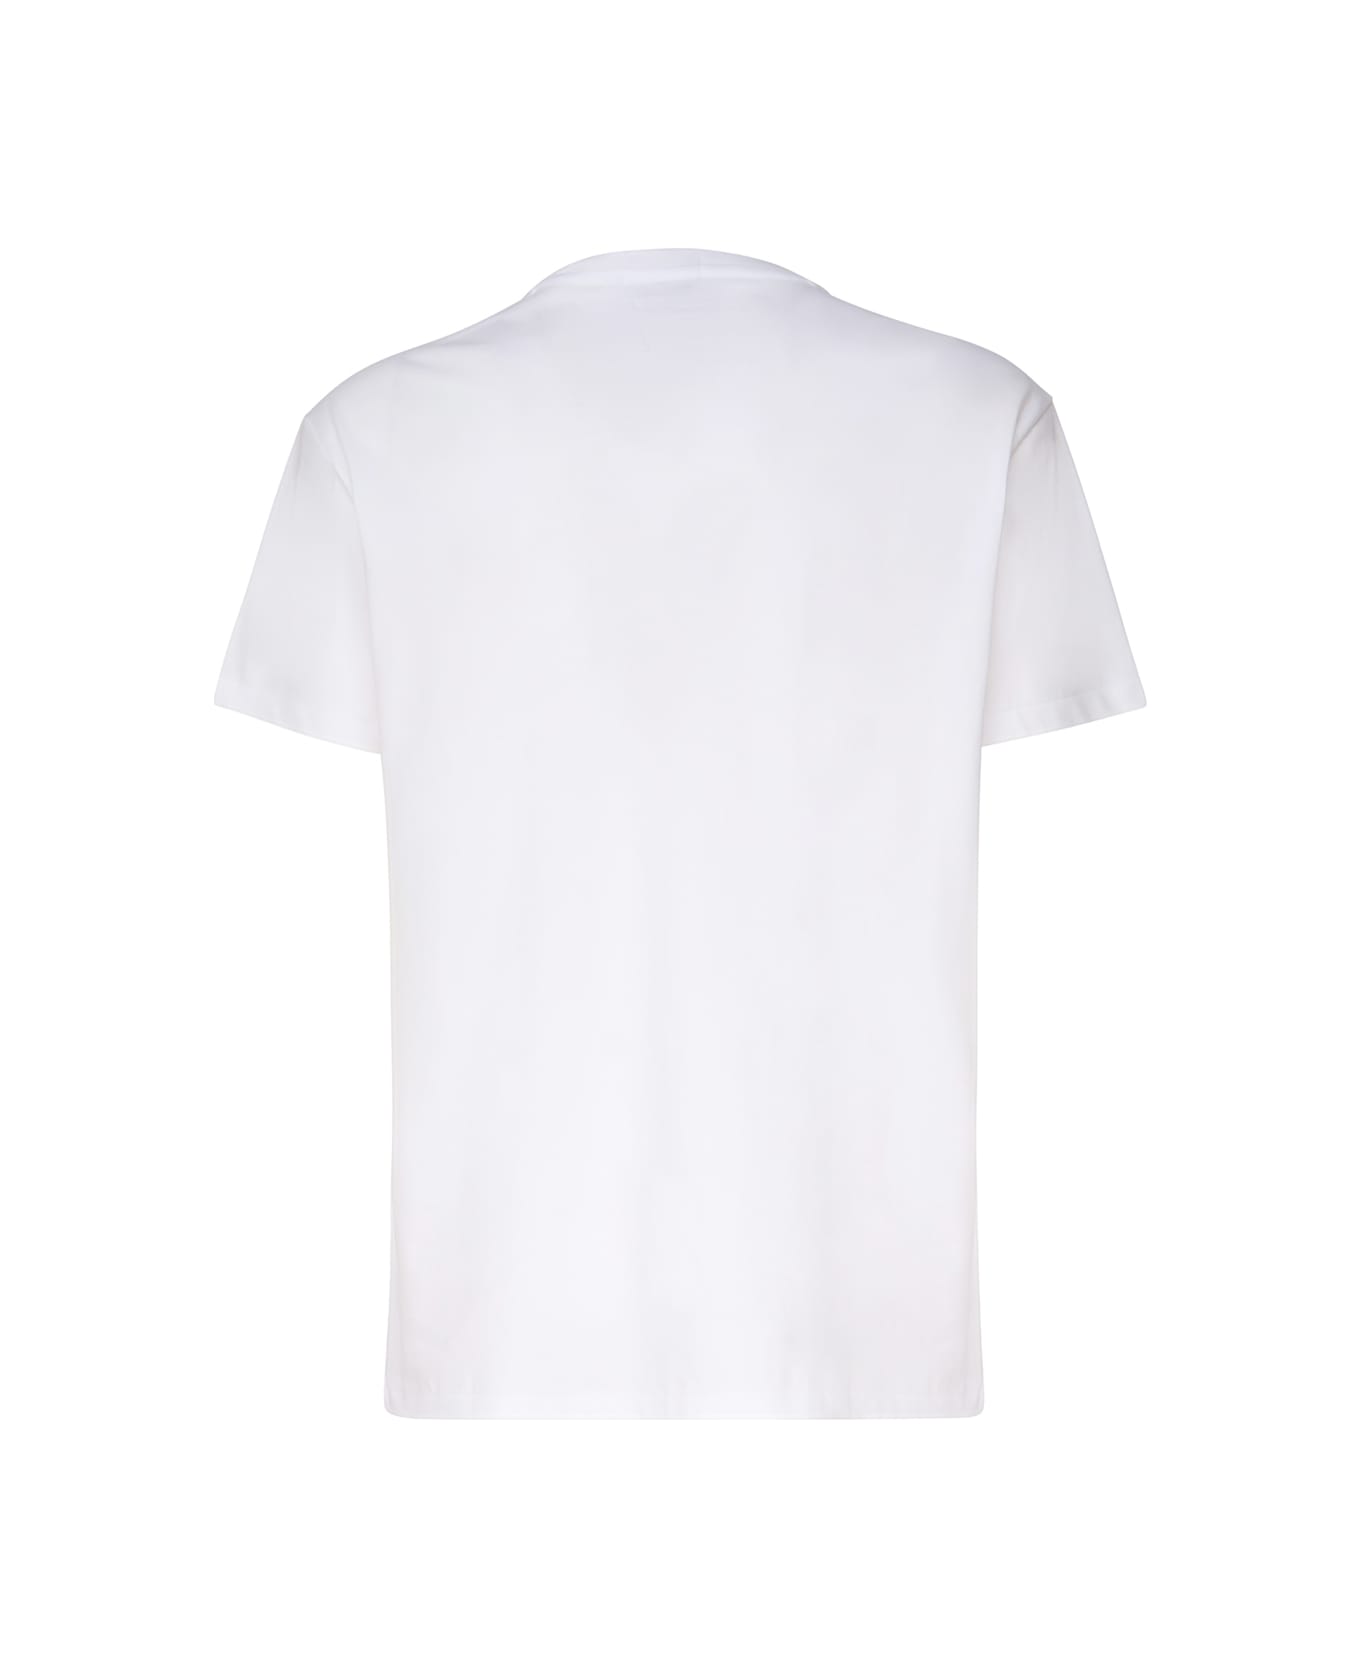 Polo Ralph Lauren T-shirt With Embroidery - White シャツ